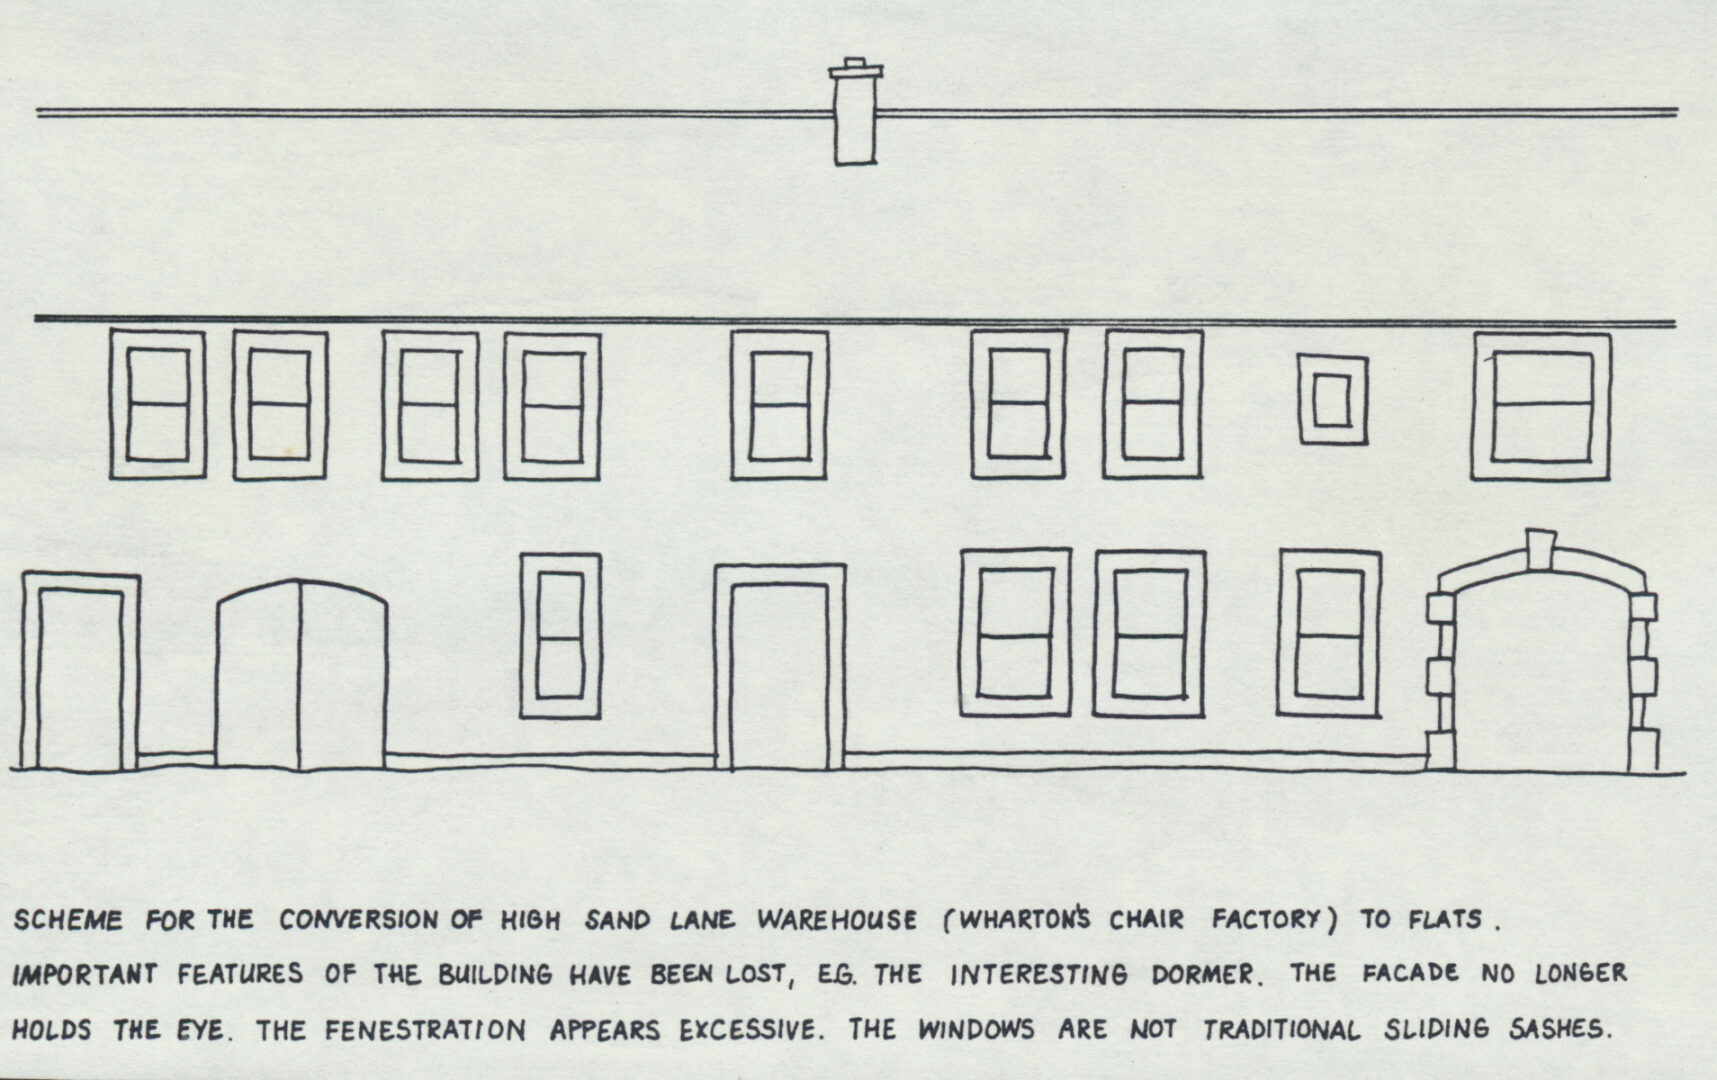 High Sands Lane warehouse Whartons chair factory conversion to flats features lost drawing